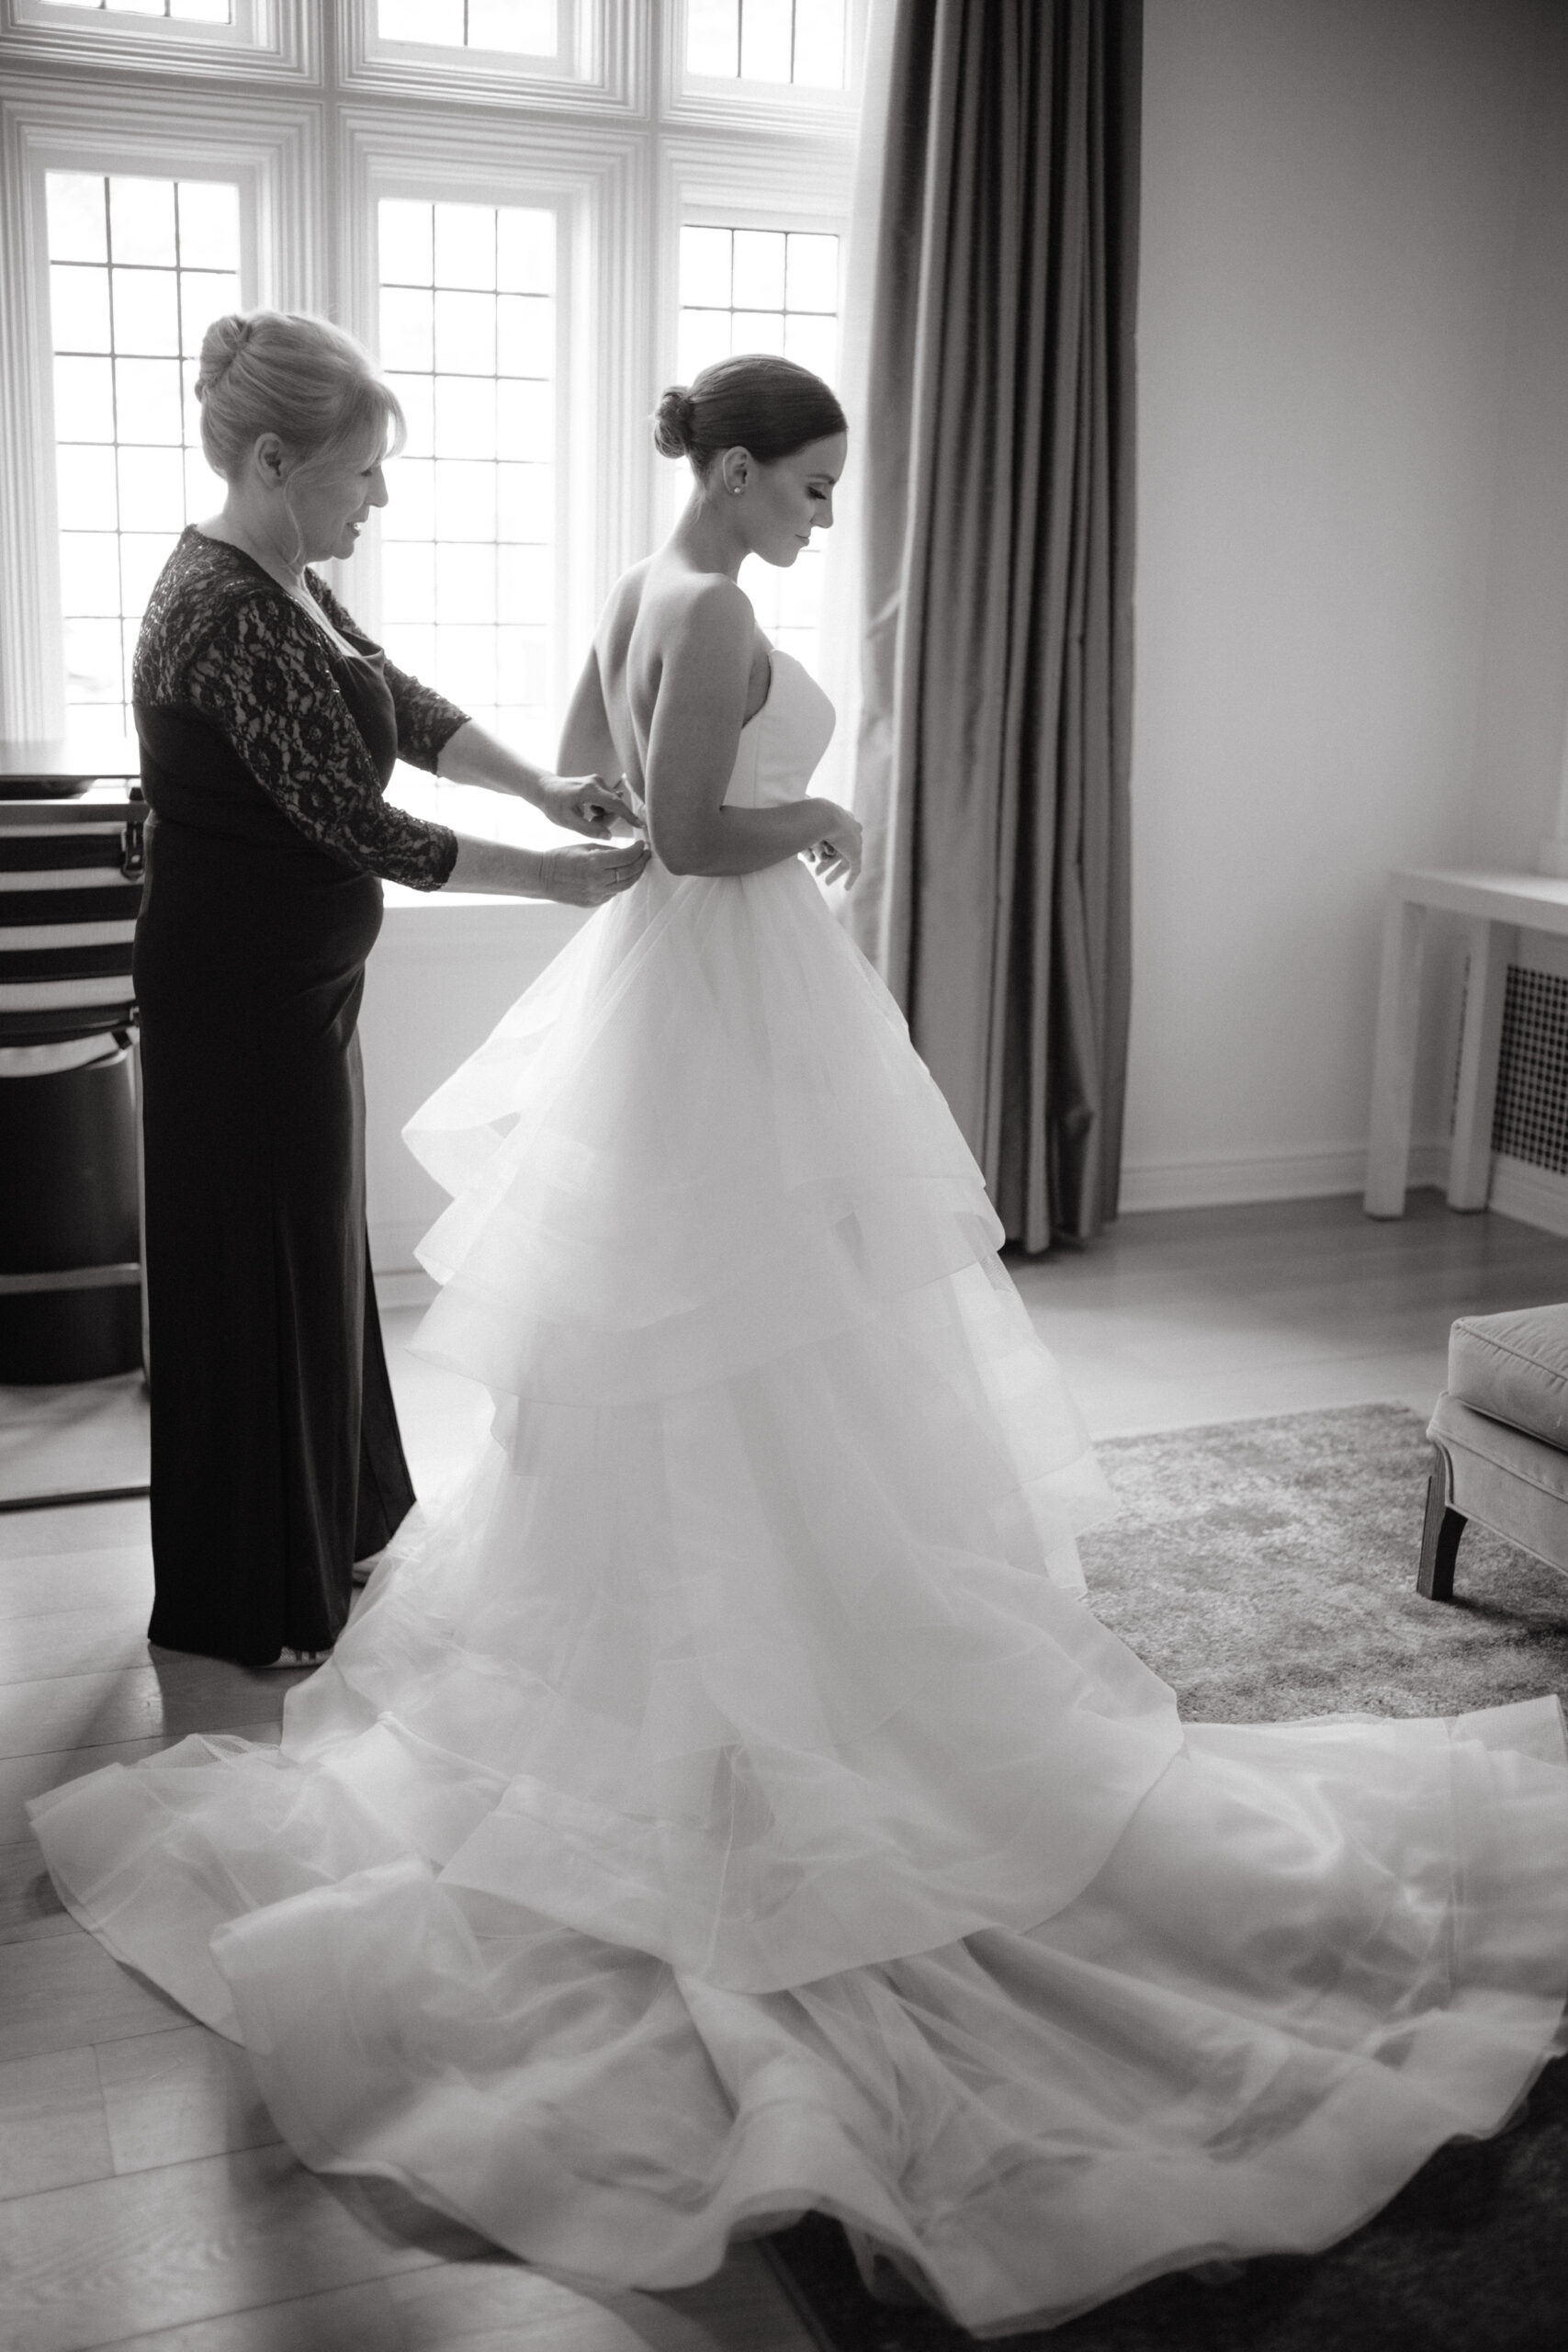 Editorial photo of the mother of the bride buttoning her daughter's wedding dress. Image by Jenny fu Studio